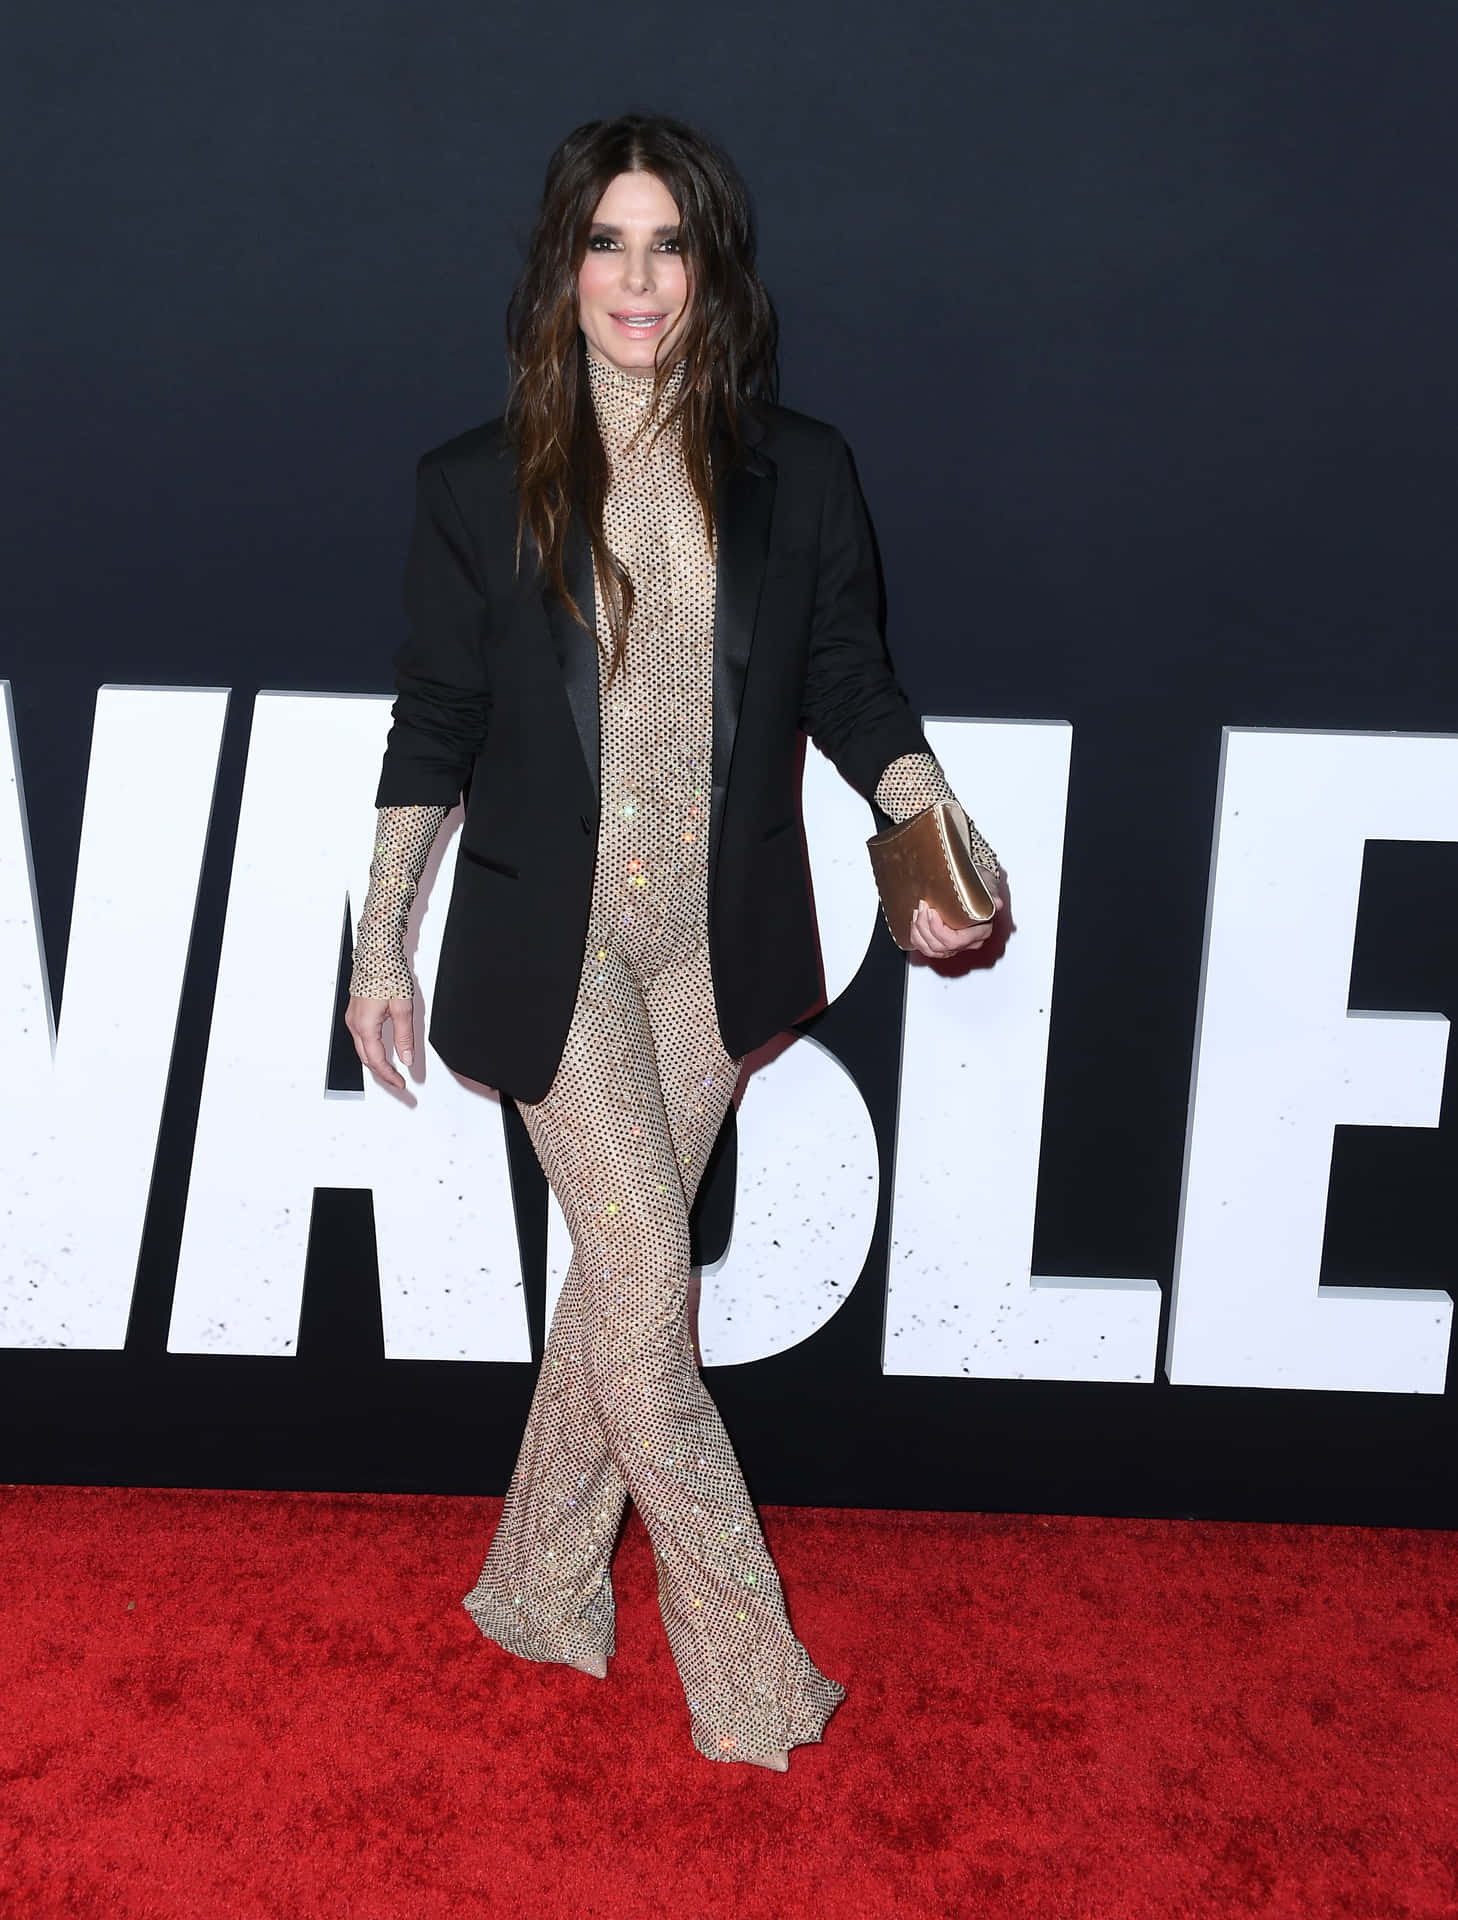 A Woman In A Black Suit And Gold Pants On A Red Carpet